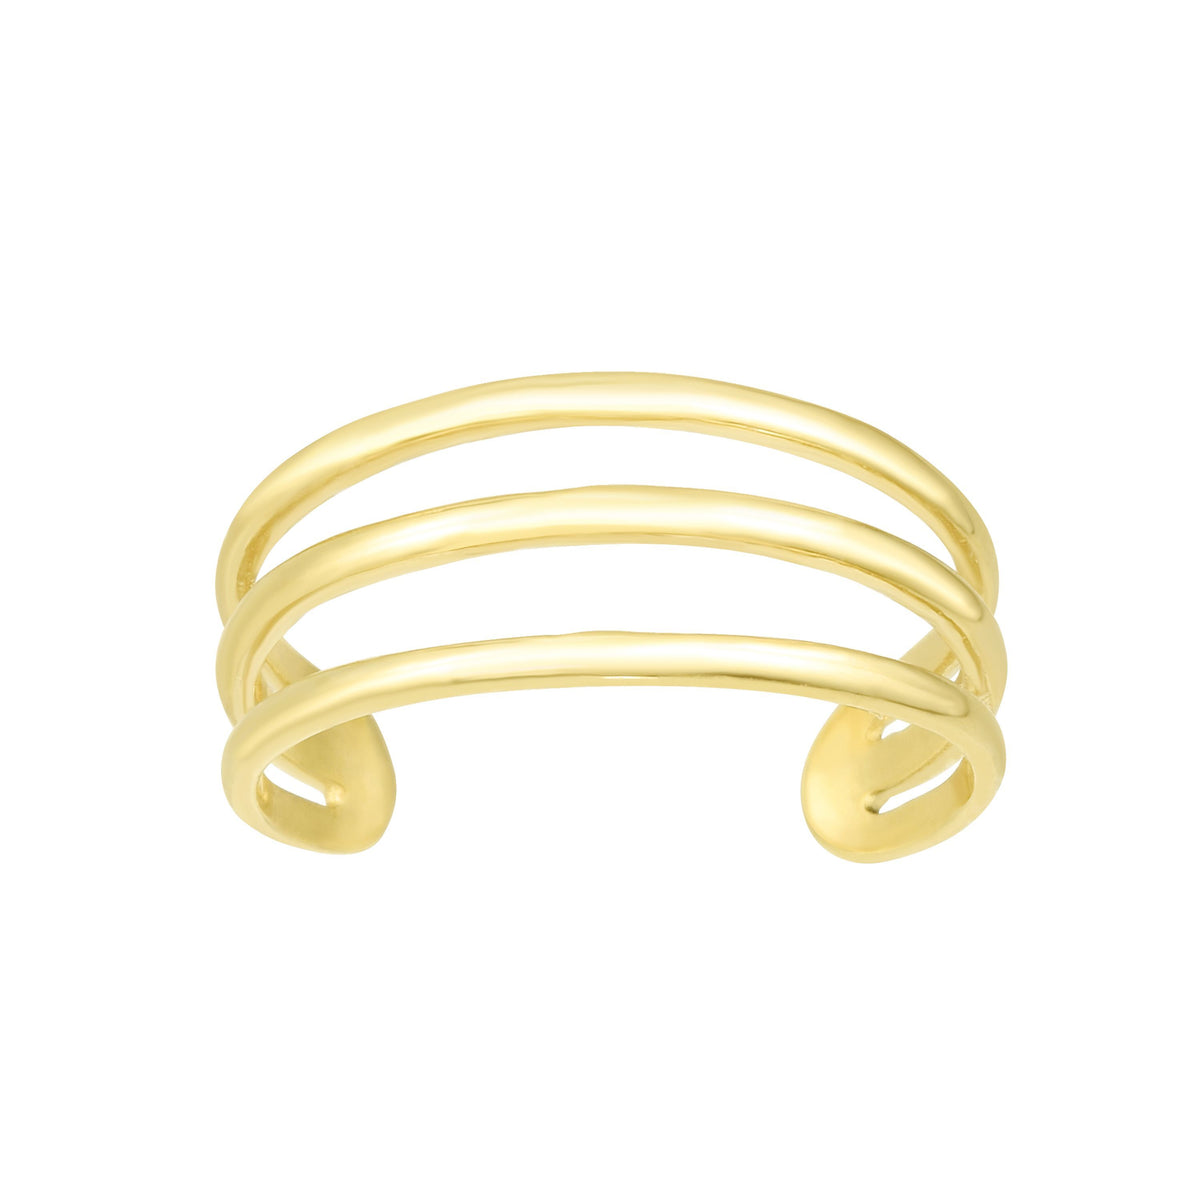 14K Yellow Gold Triple Bar Adjustable Toe Ring 6.5mm fine designer jewelry for men and women